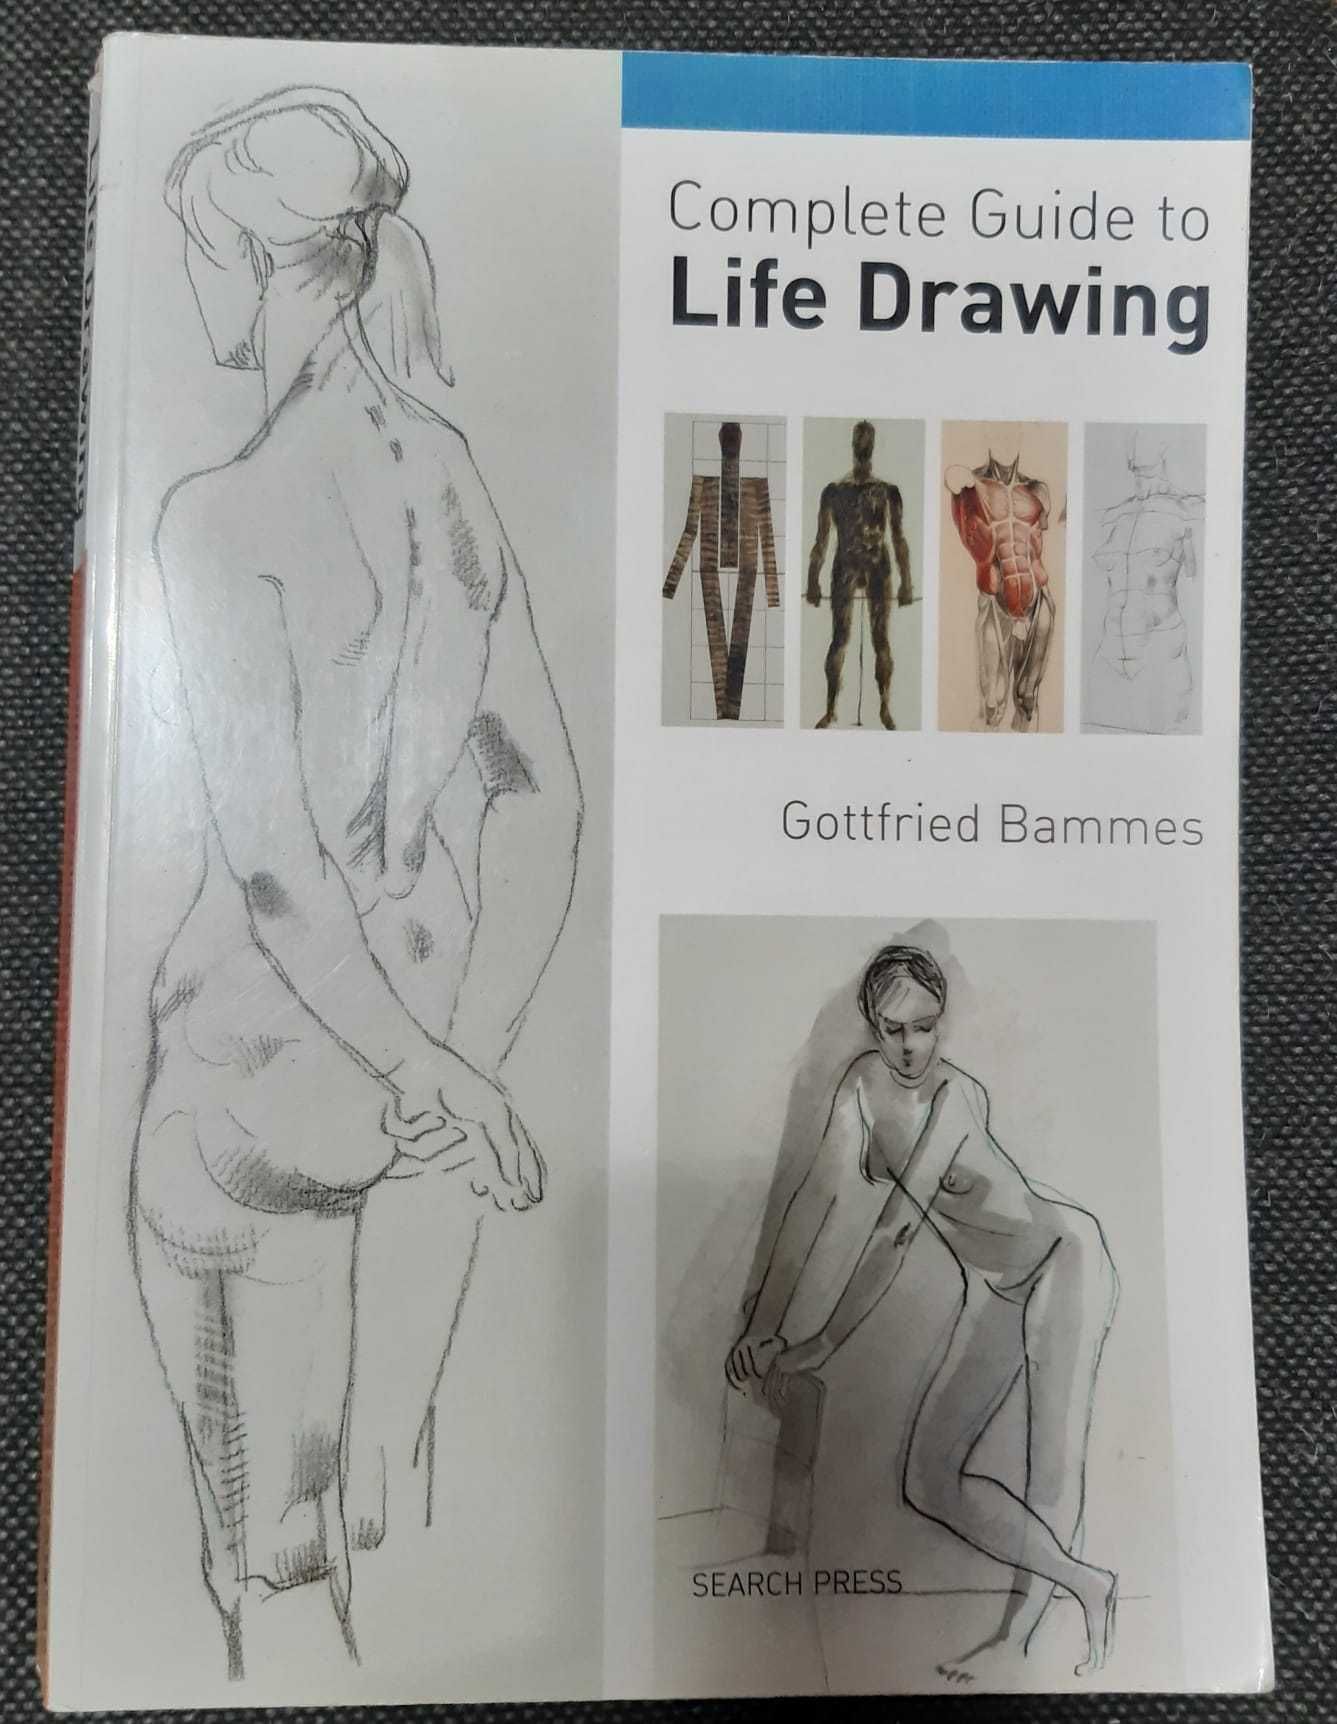 Vand "Complete Guide to Life Drawing" de Gottfried Bammes